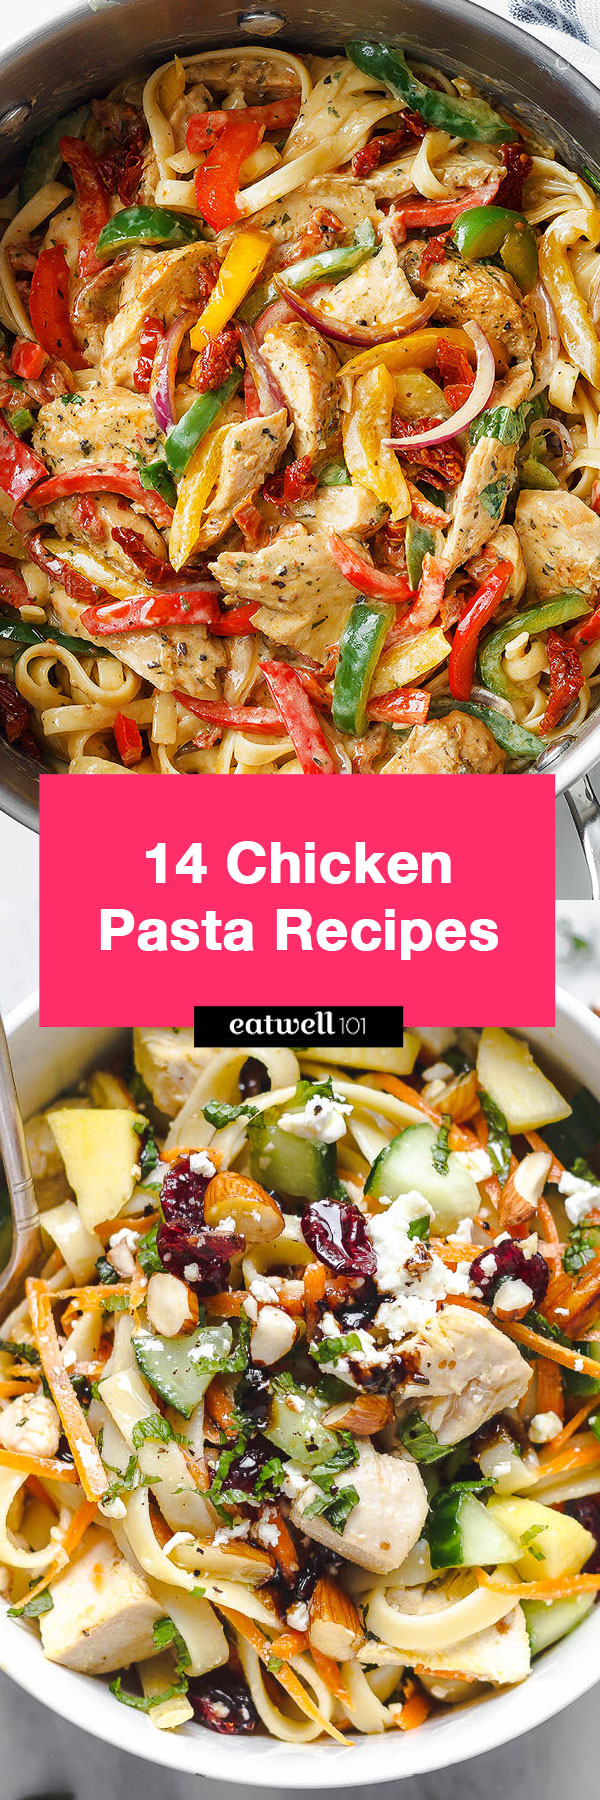 Chicken pasta recipes - If you’re on the hunt for a brand new, easy chicken pasta dinner recipe, your winner is right here for sure!